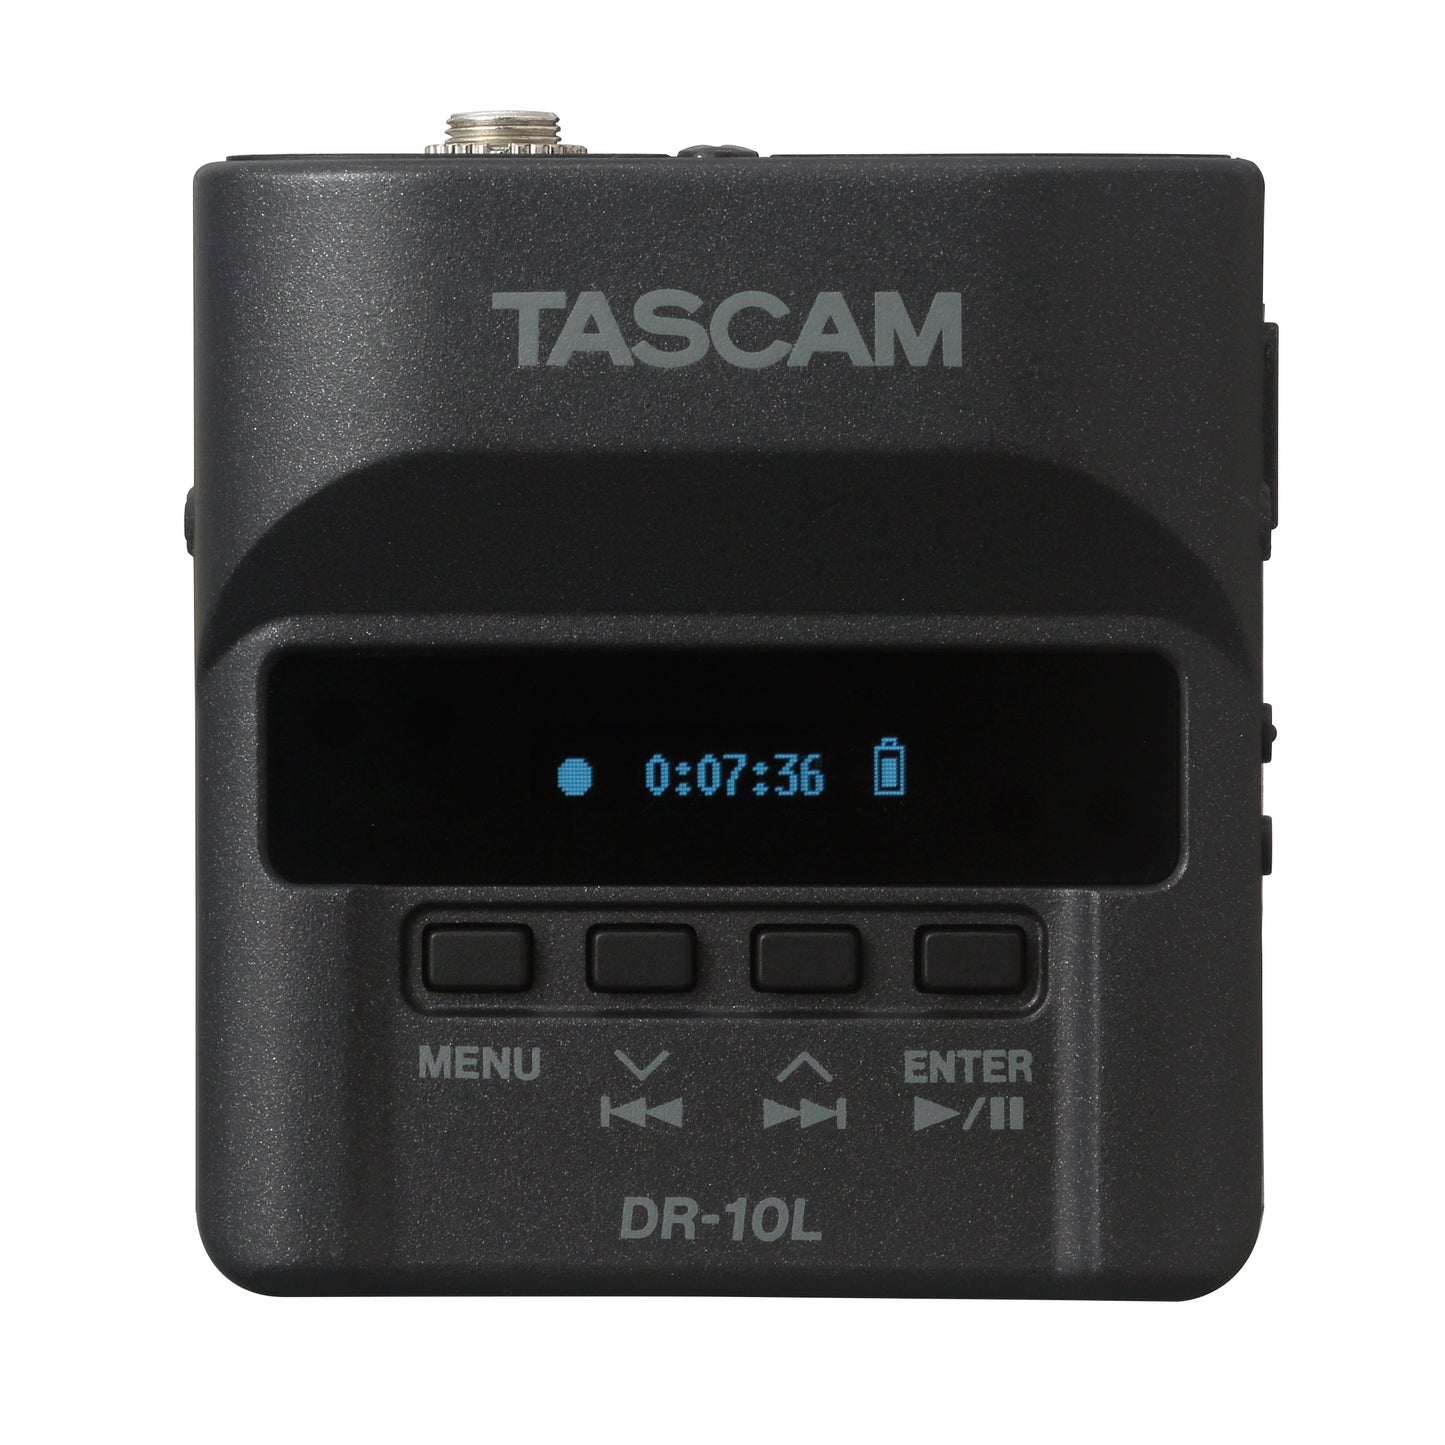 Tascam DR-10L Digital Audio Recorder (with Lavalier Microphone), Black